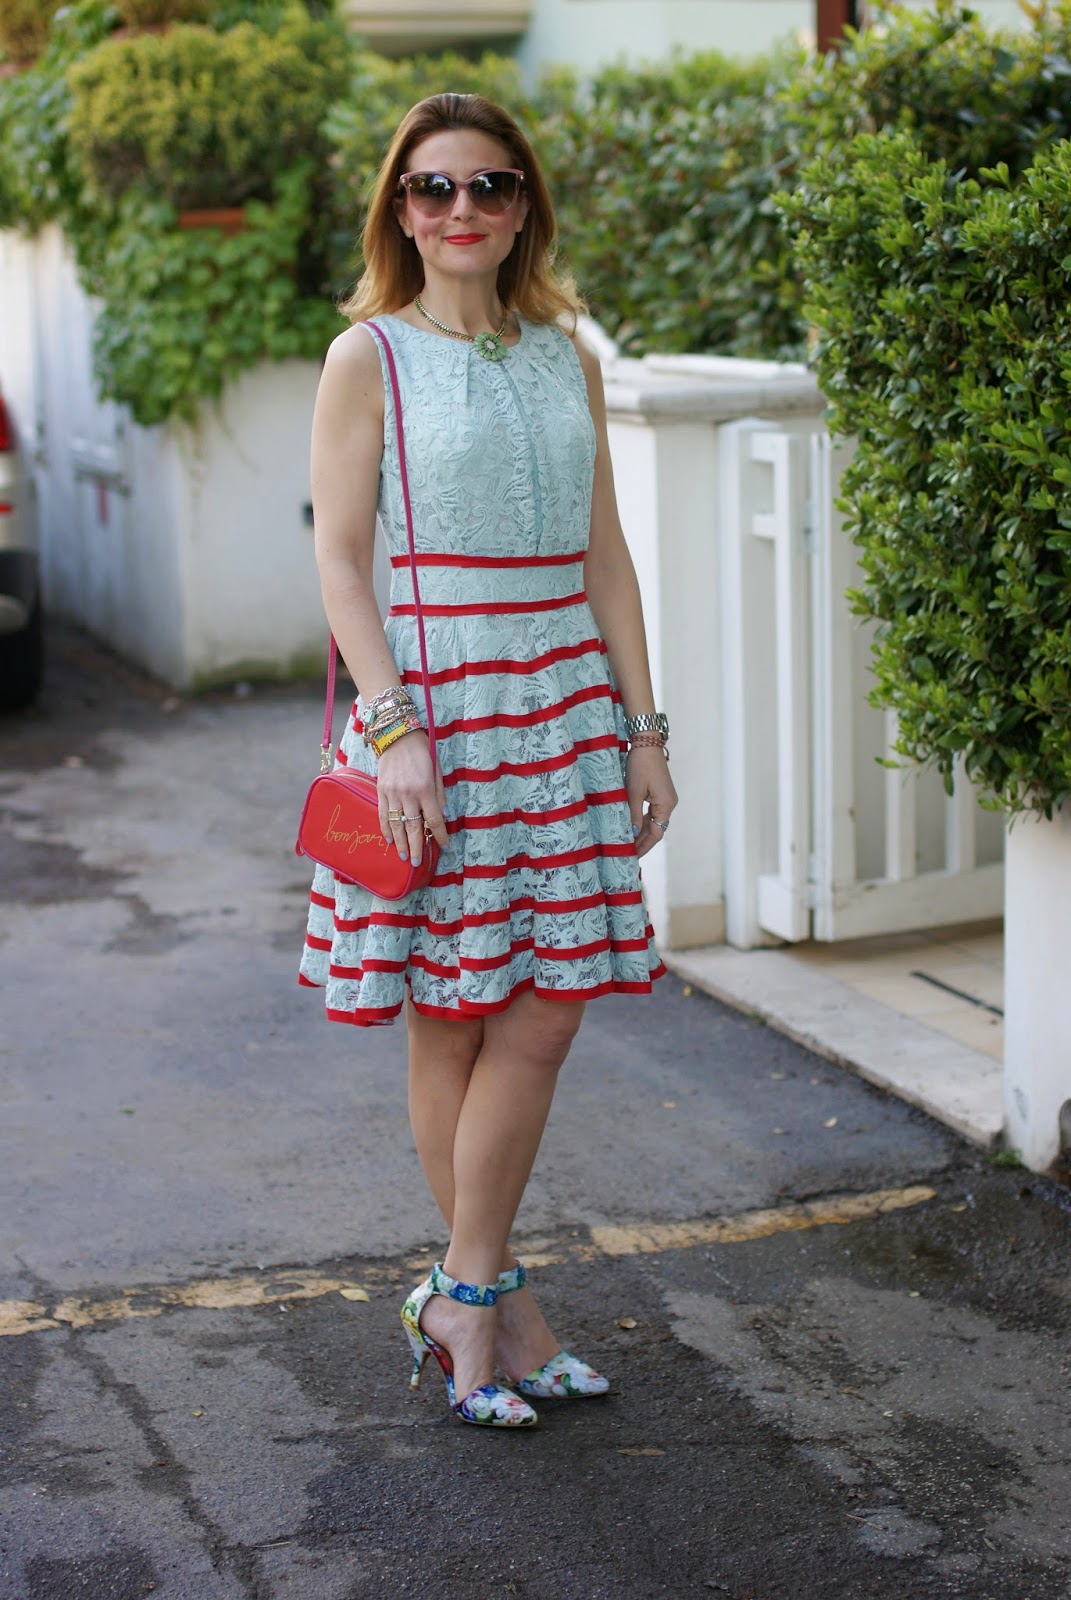 Jeffrey Campbell soltair pumps, chicwish lace dress, bonjour bag, Fashion and Cookies, fashion blogger